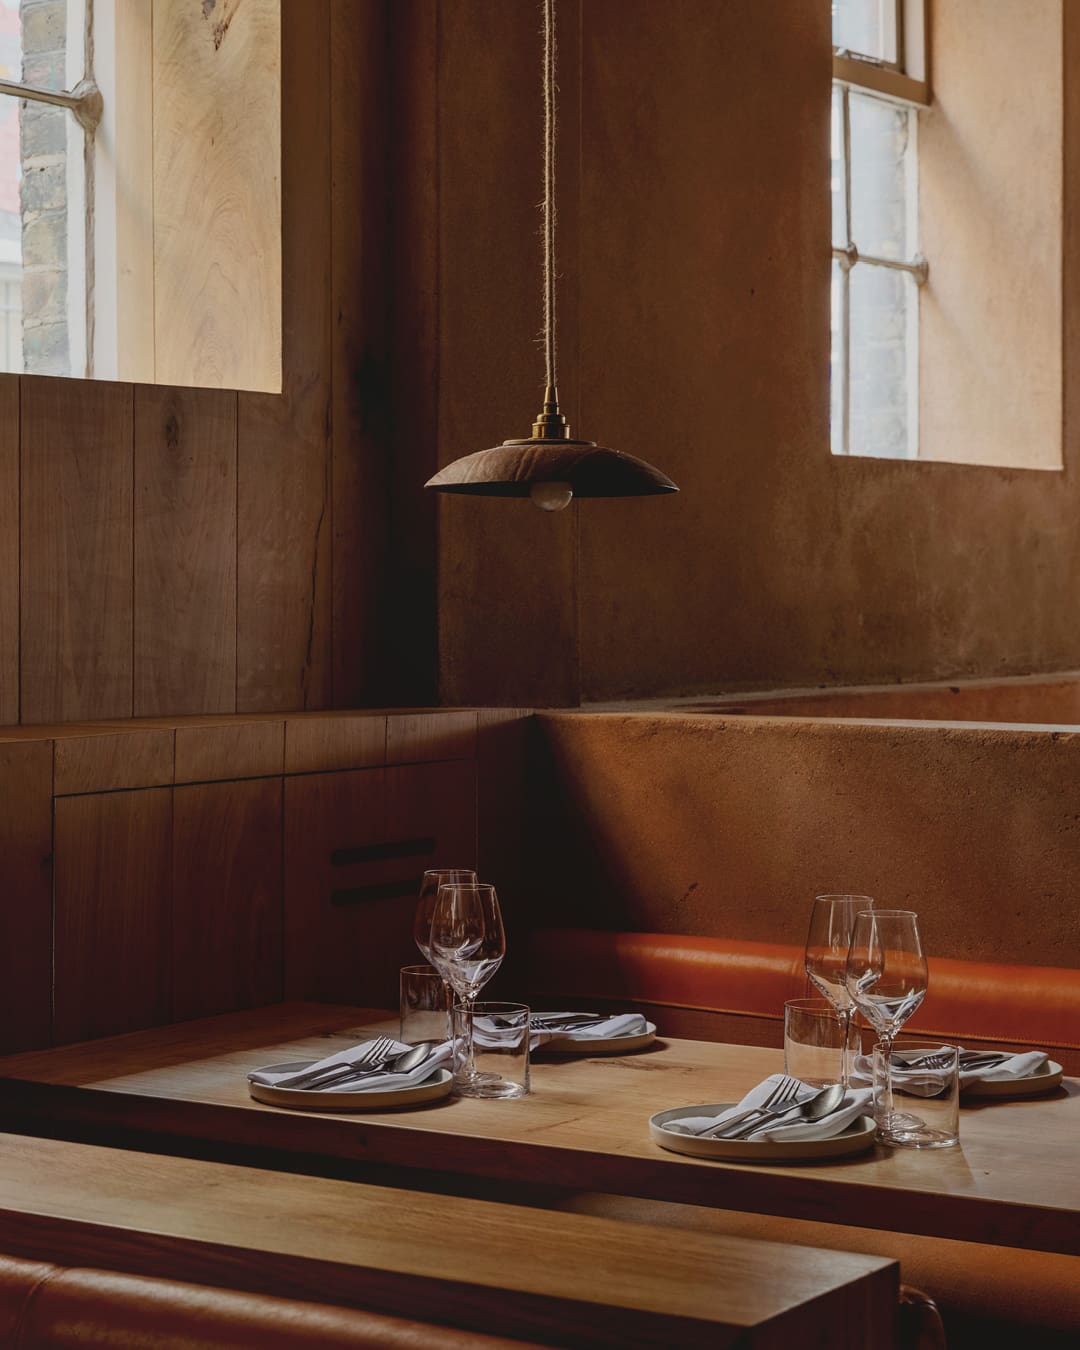 The best restaurants in Shoreditch and Spitalfields | pared back interiors at Manteca in brown tones